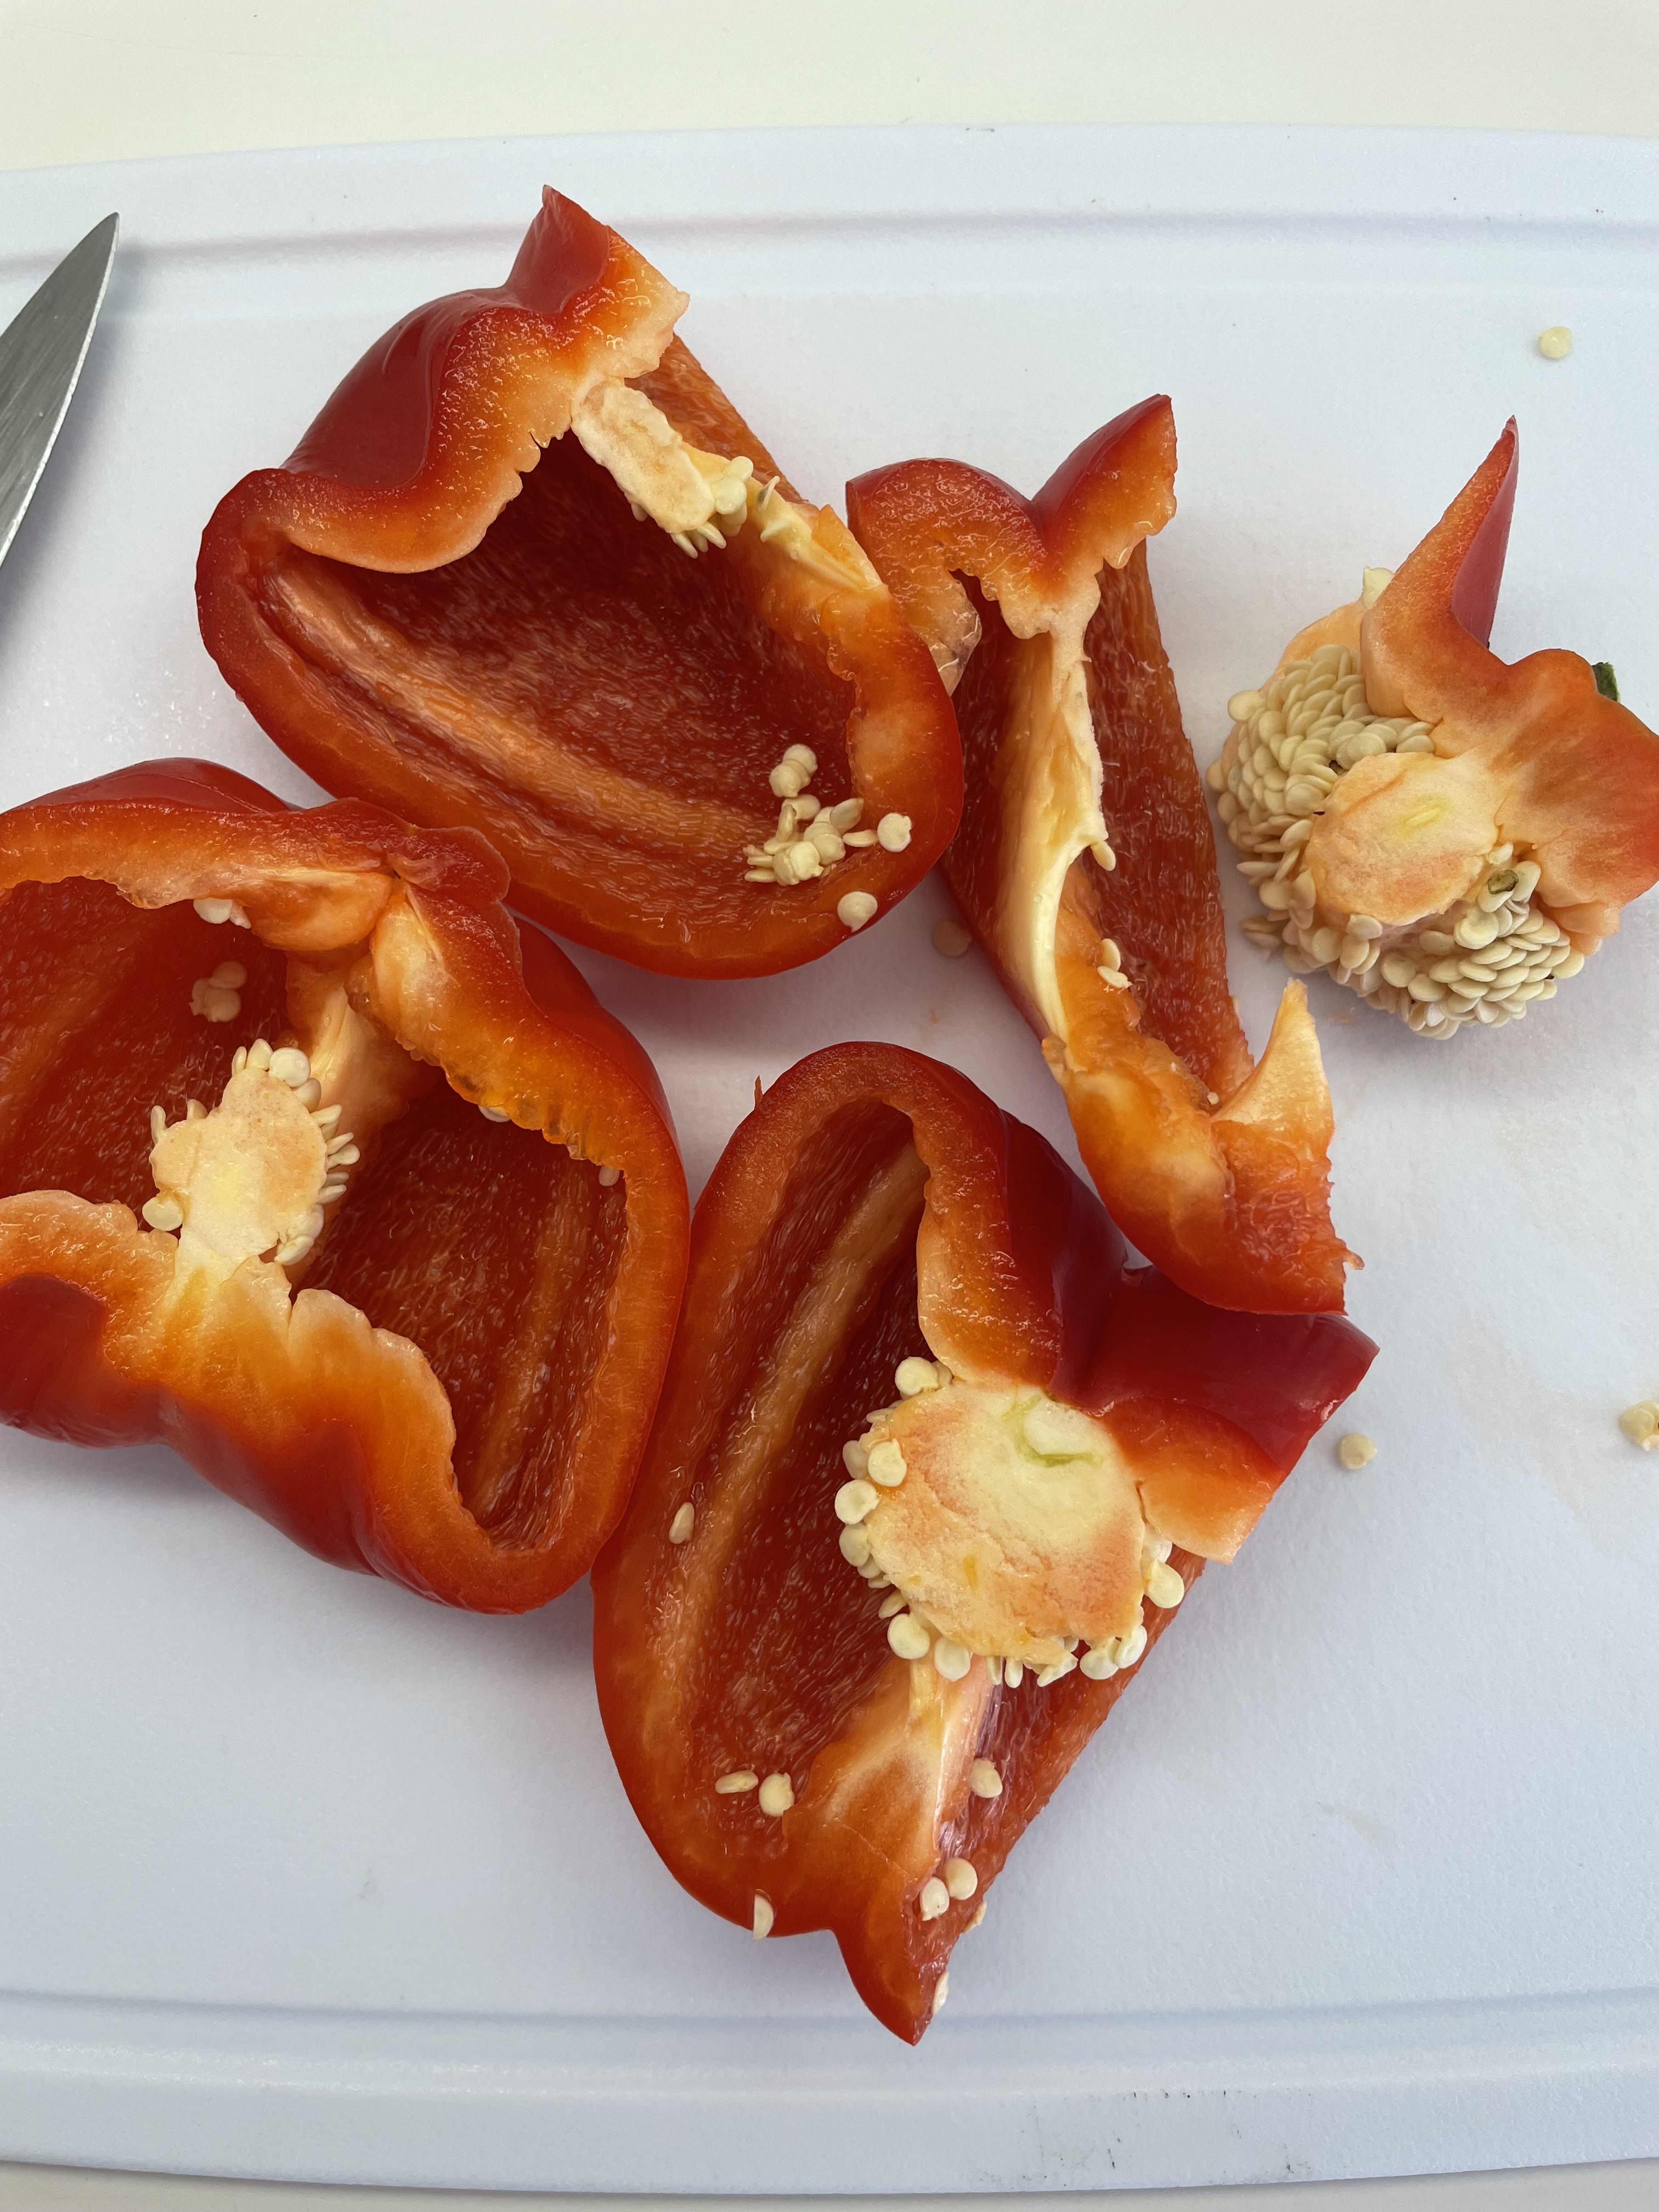 We Tried TikTok's Hack for Cutting Bell Peppers